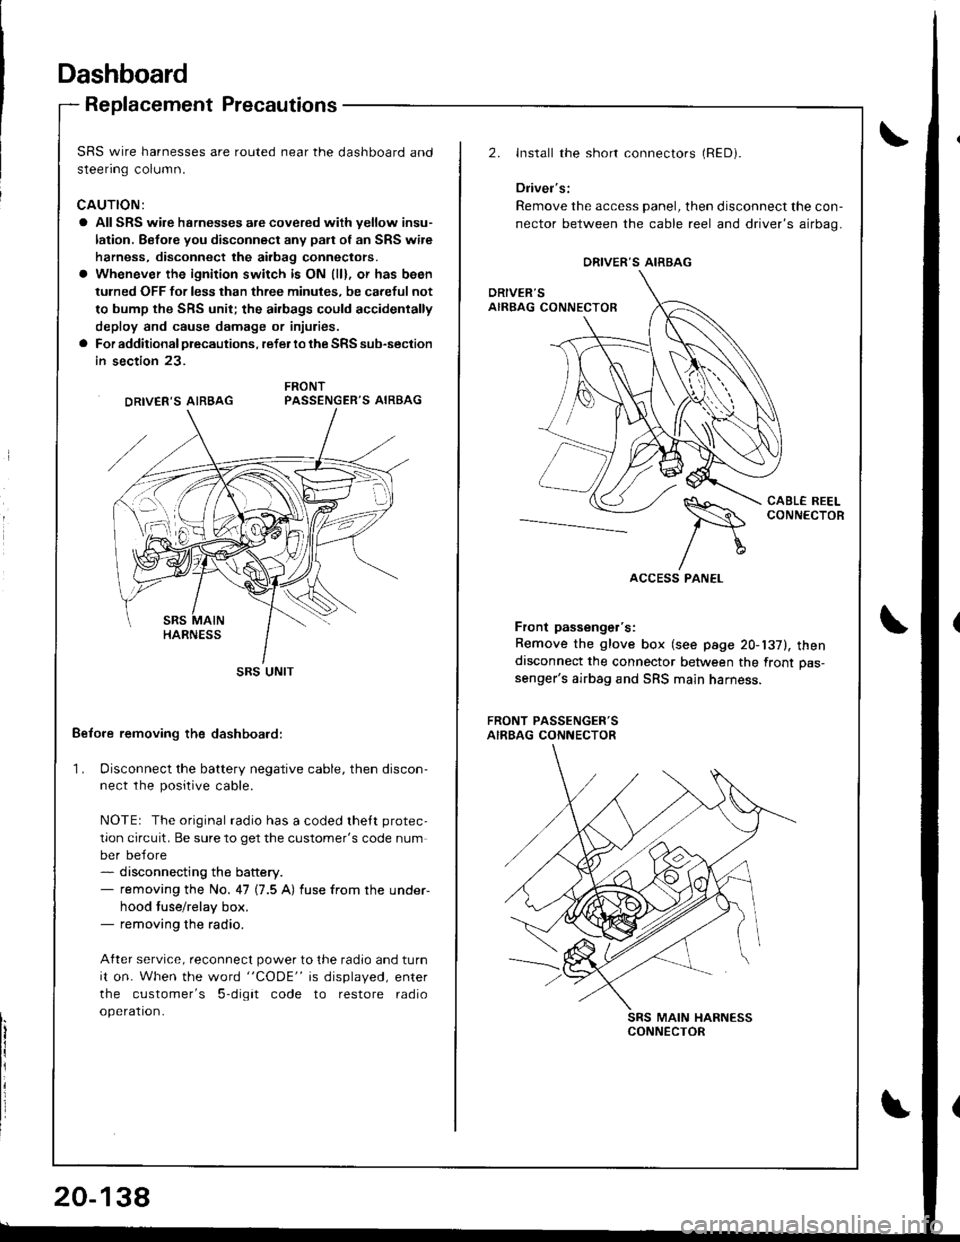 HONDA INTEGRA 1998 4.G Workshop Manual Dashboard
Replacement Precautions
SRS wire harnesses are routed near the dashboard and
steenng column.
CAUTION:
a All SRS wire hsrnesses are covered wiih yellow insu-
lation. Before you disconnect any